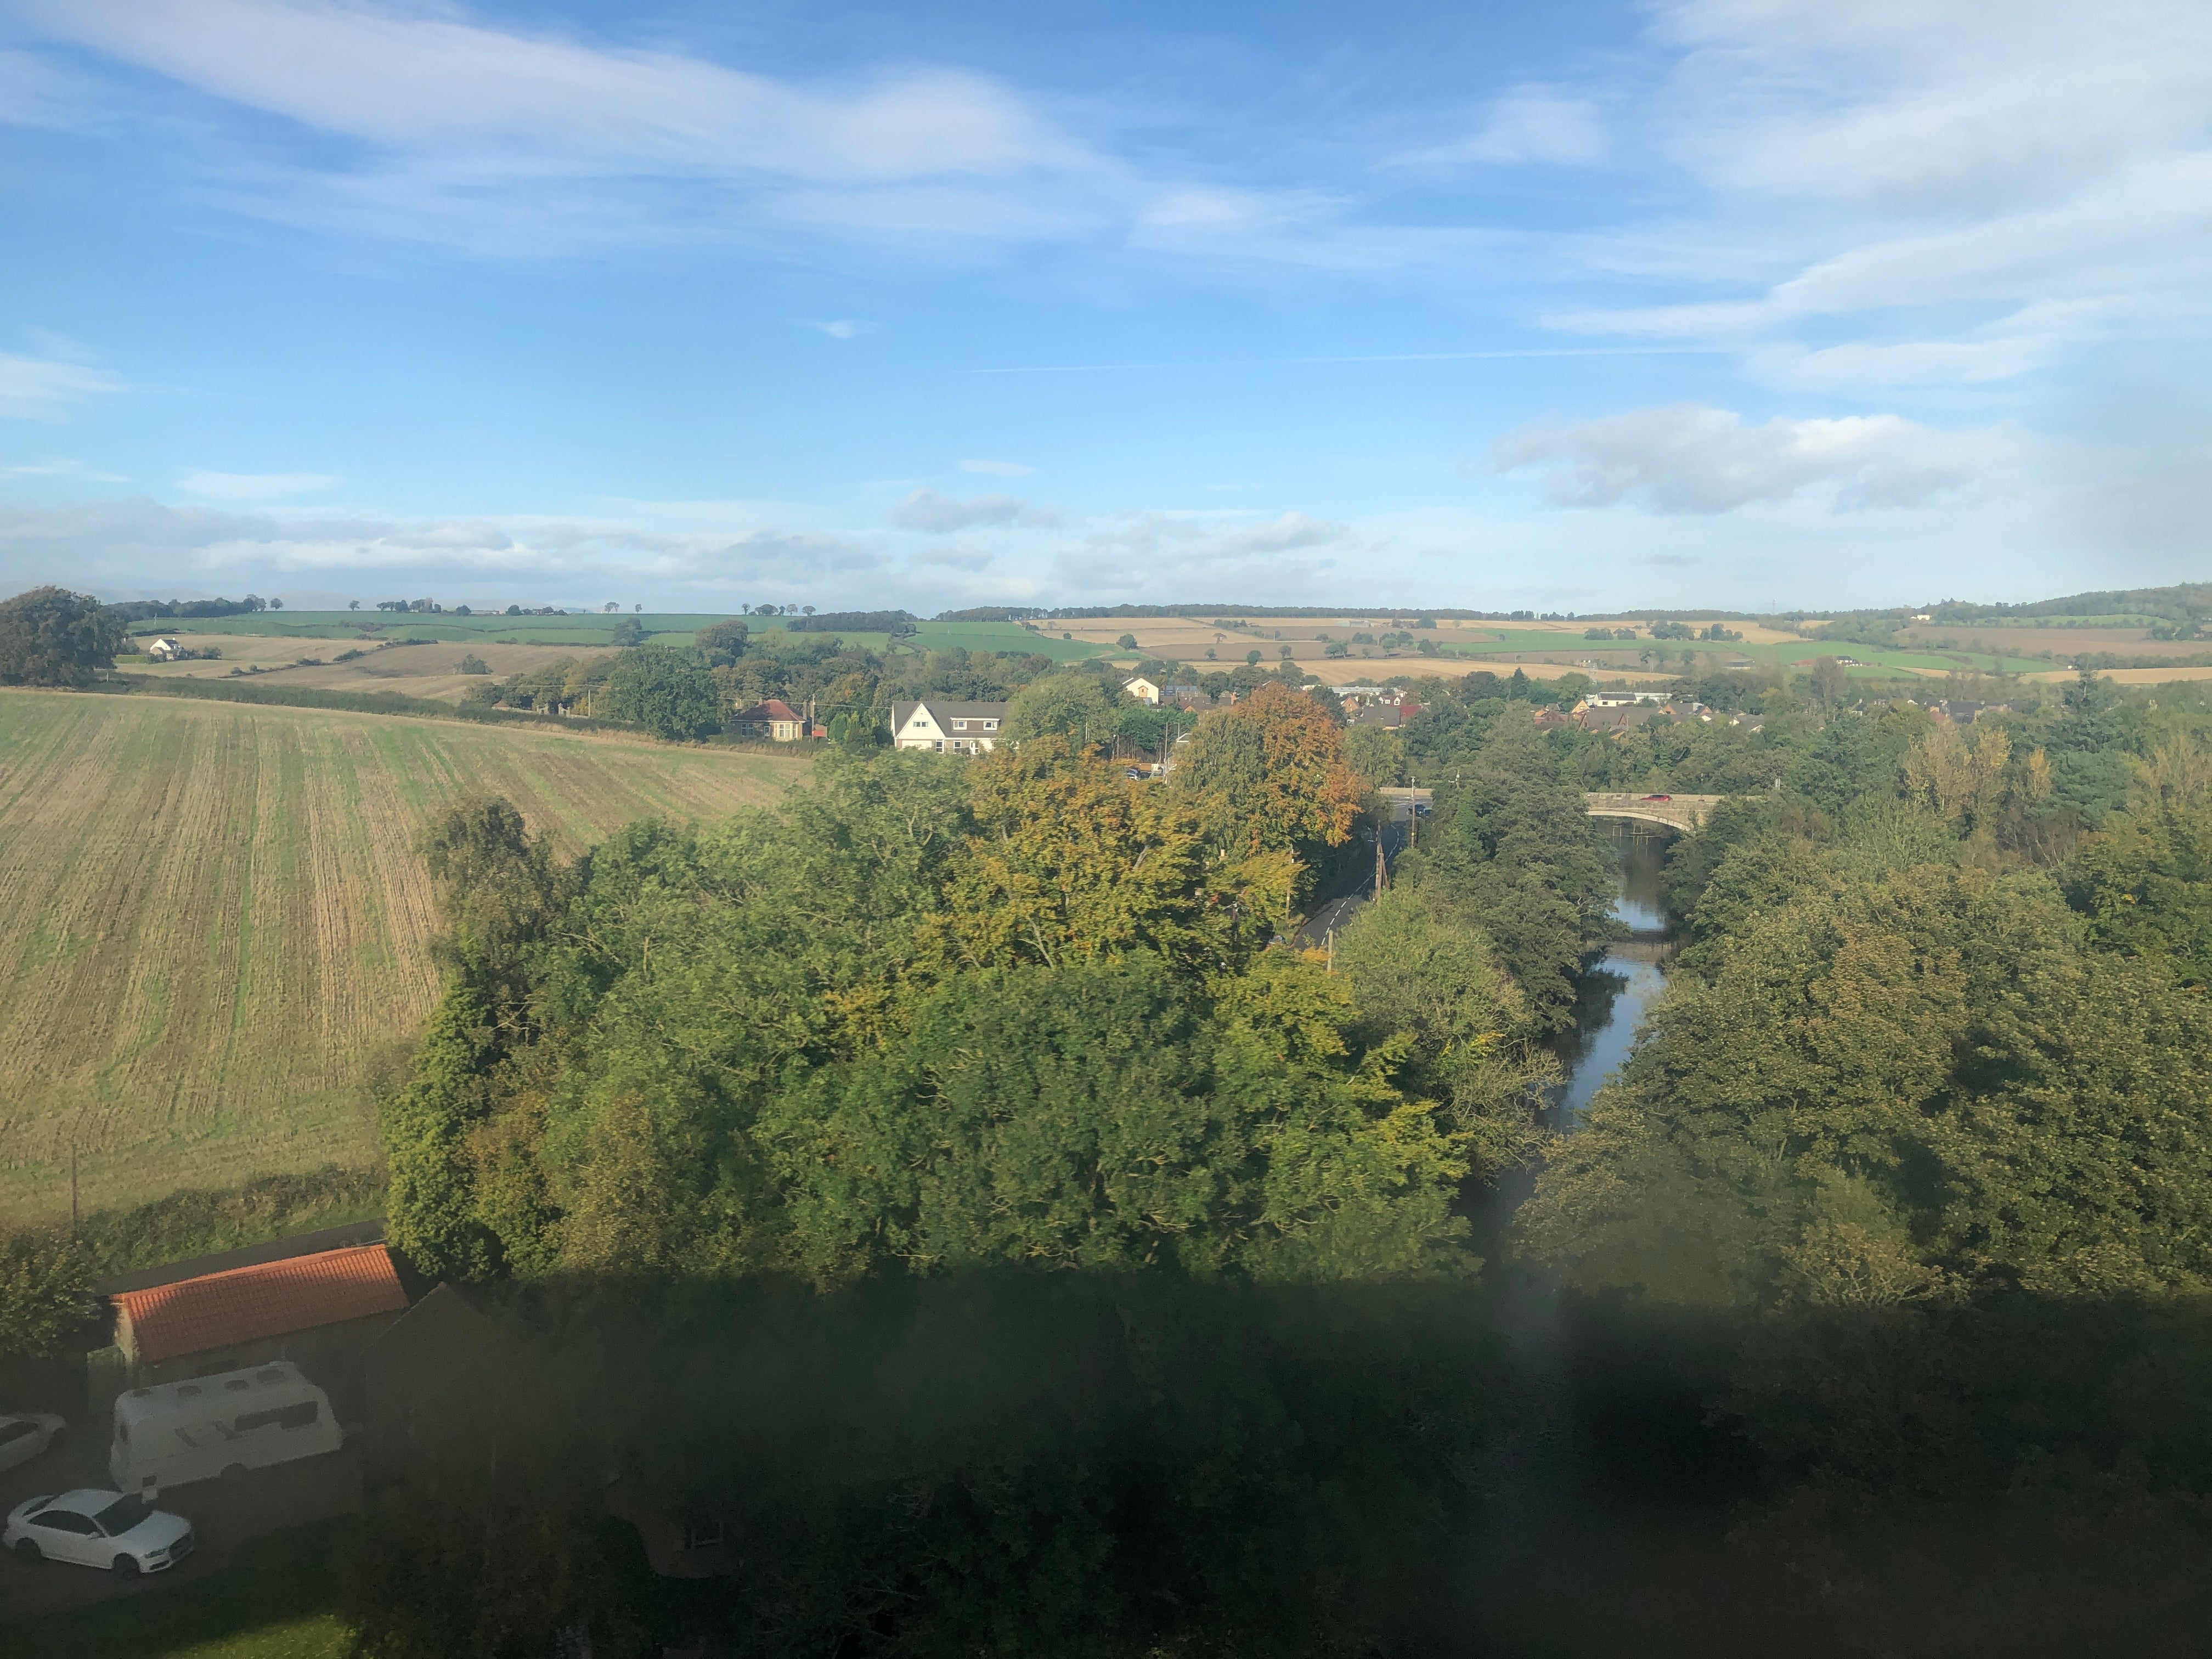 Blue sky thinking: from a train, near Linlithgow